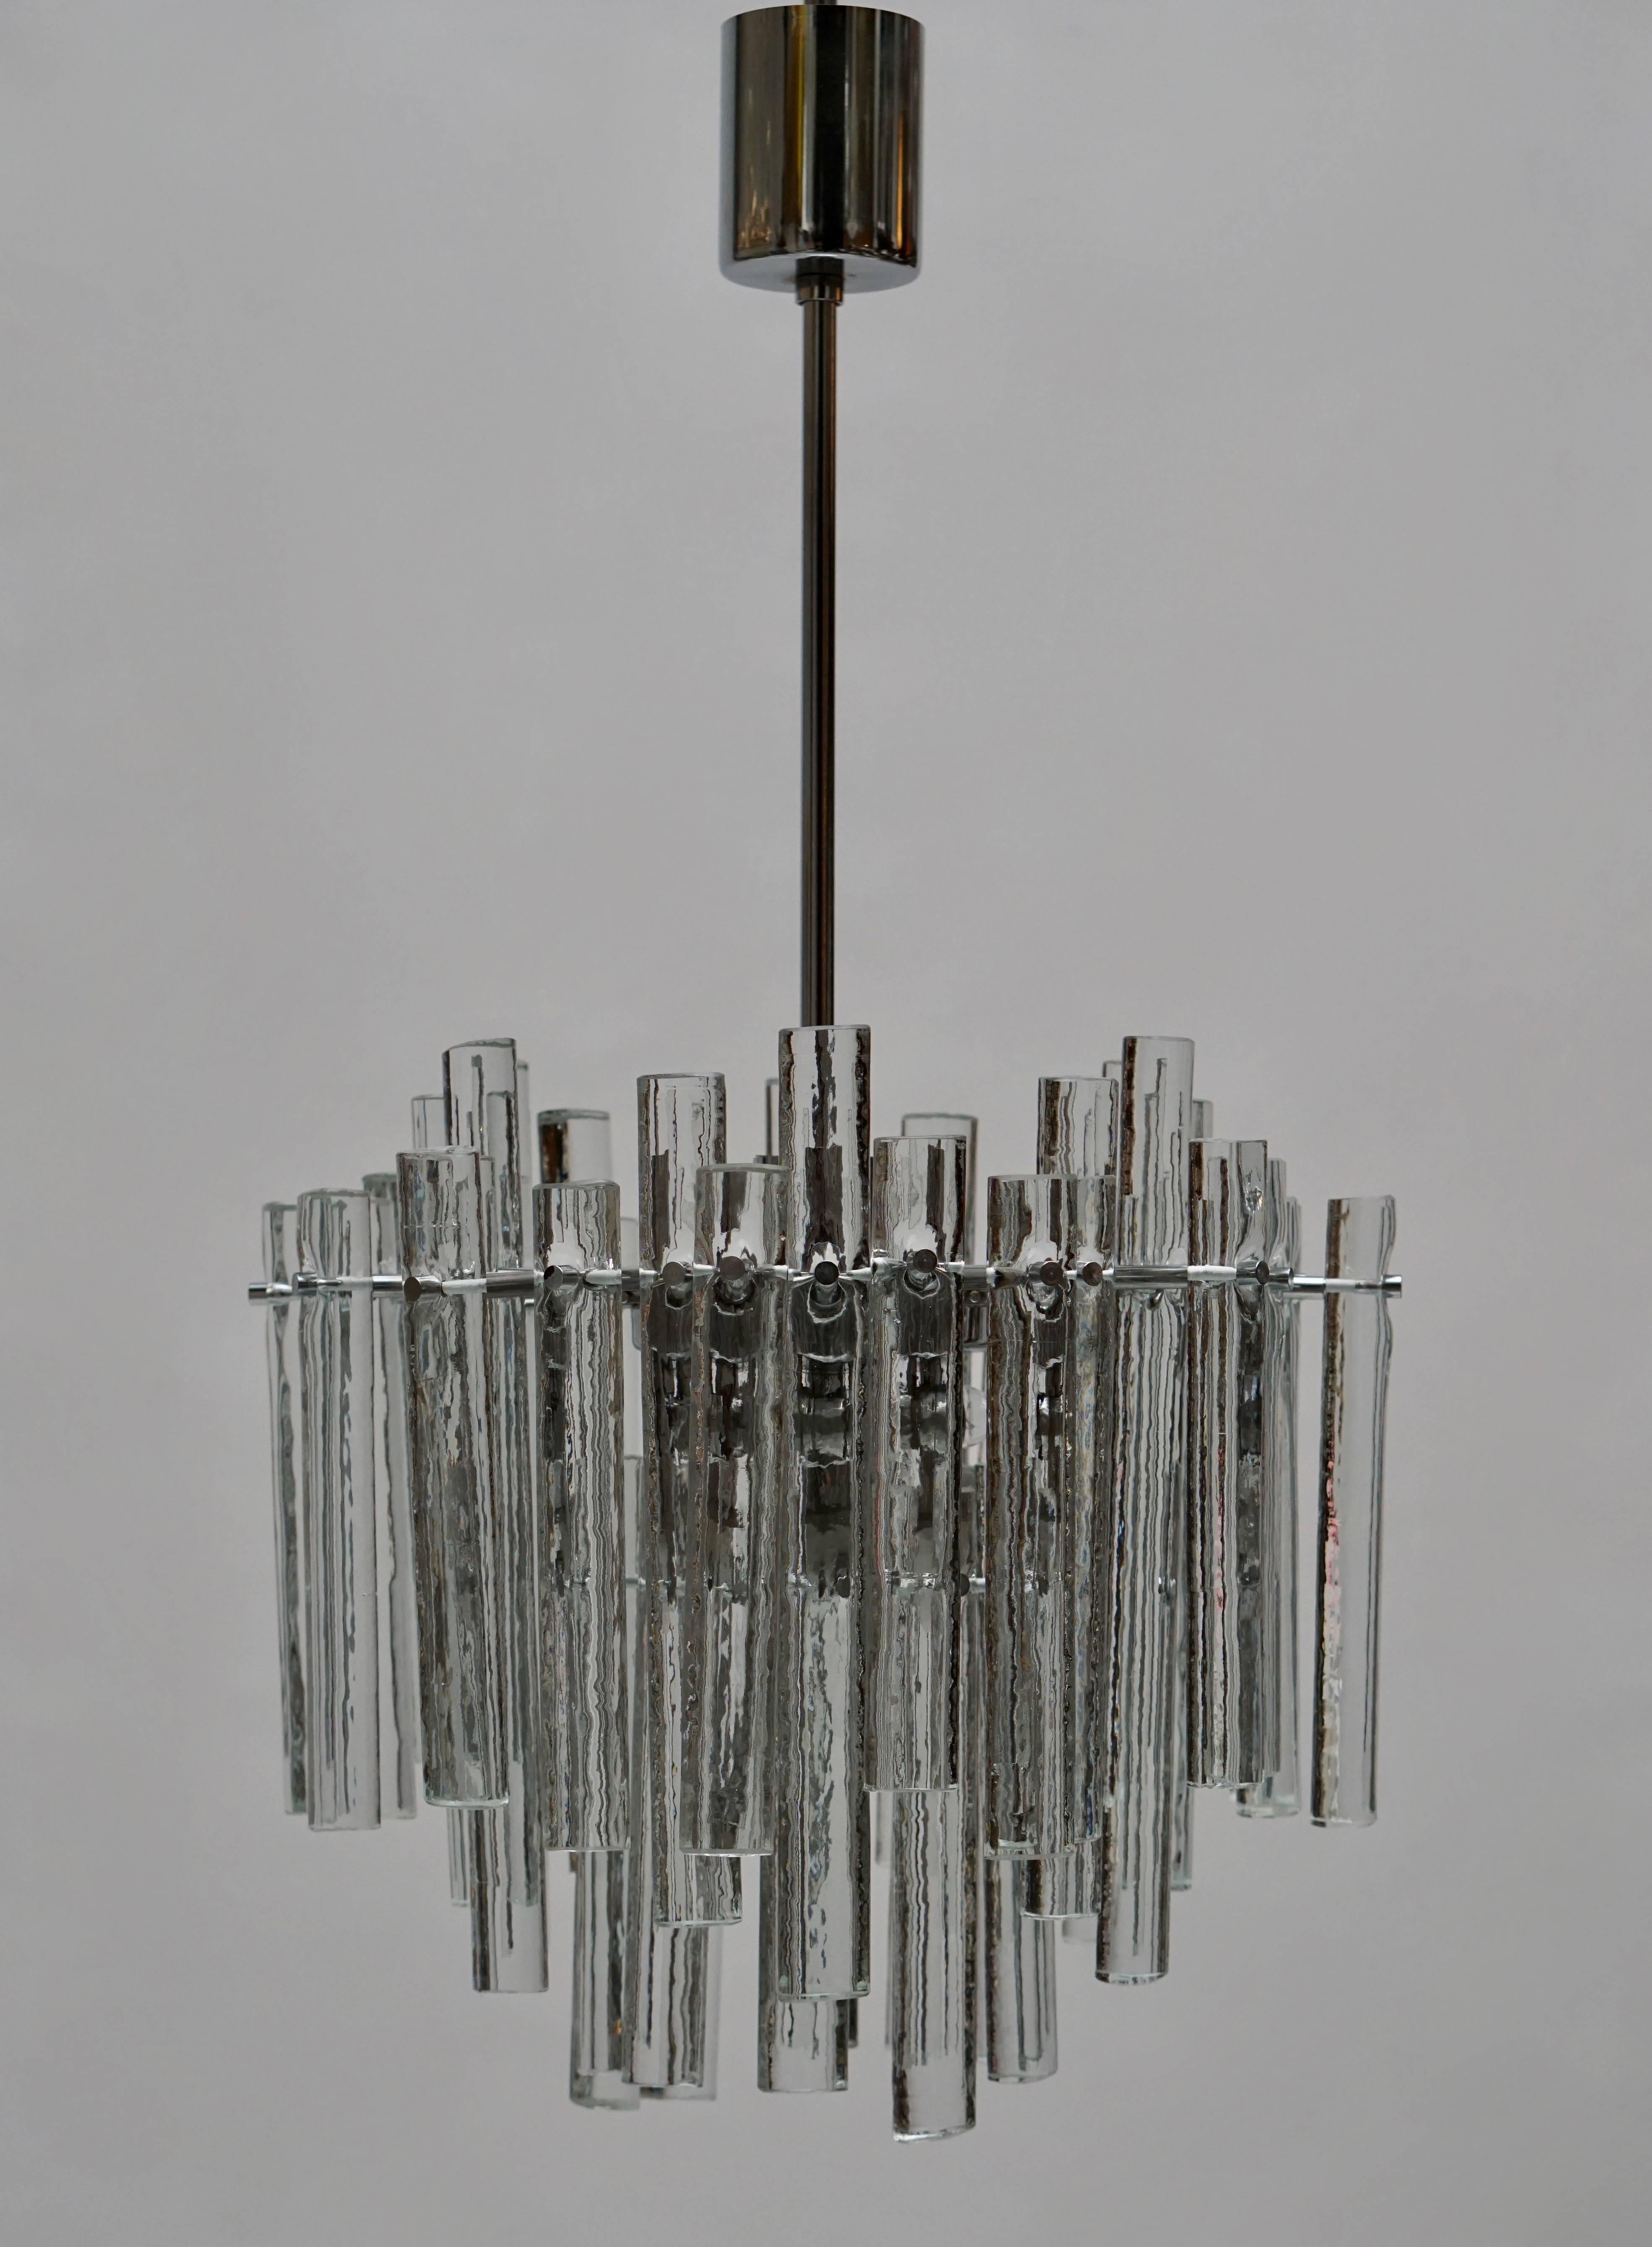 A beautiful Kinkeldey chandelier with 46 clear handmade ice crystals in varying lengths.
New wiring, three E-14 base bulbs and one E27 bulb up to 40 watts per bulb.

Materials: Chromed metal, 46 clear crystal glass handmade “ice blocks”. Metal